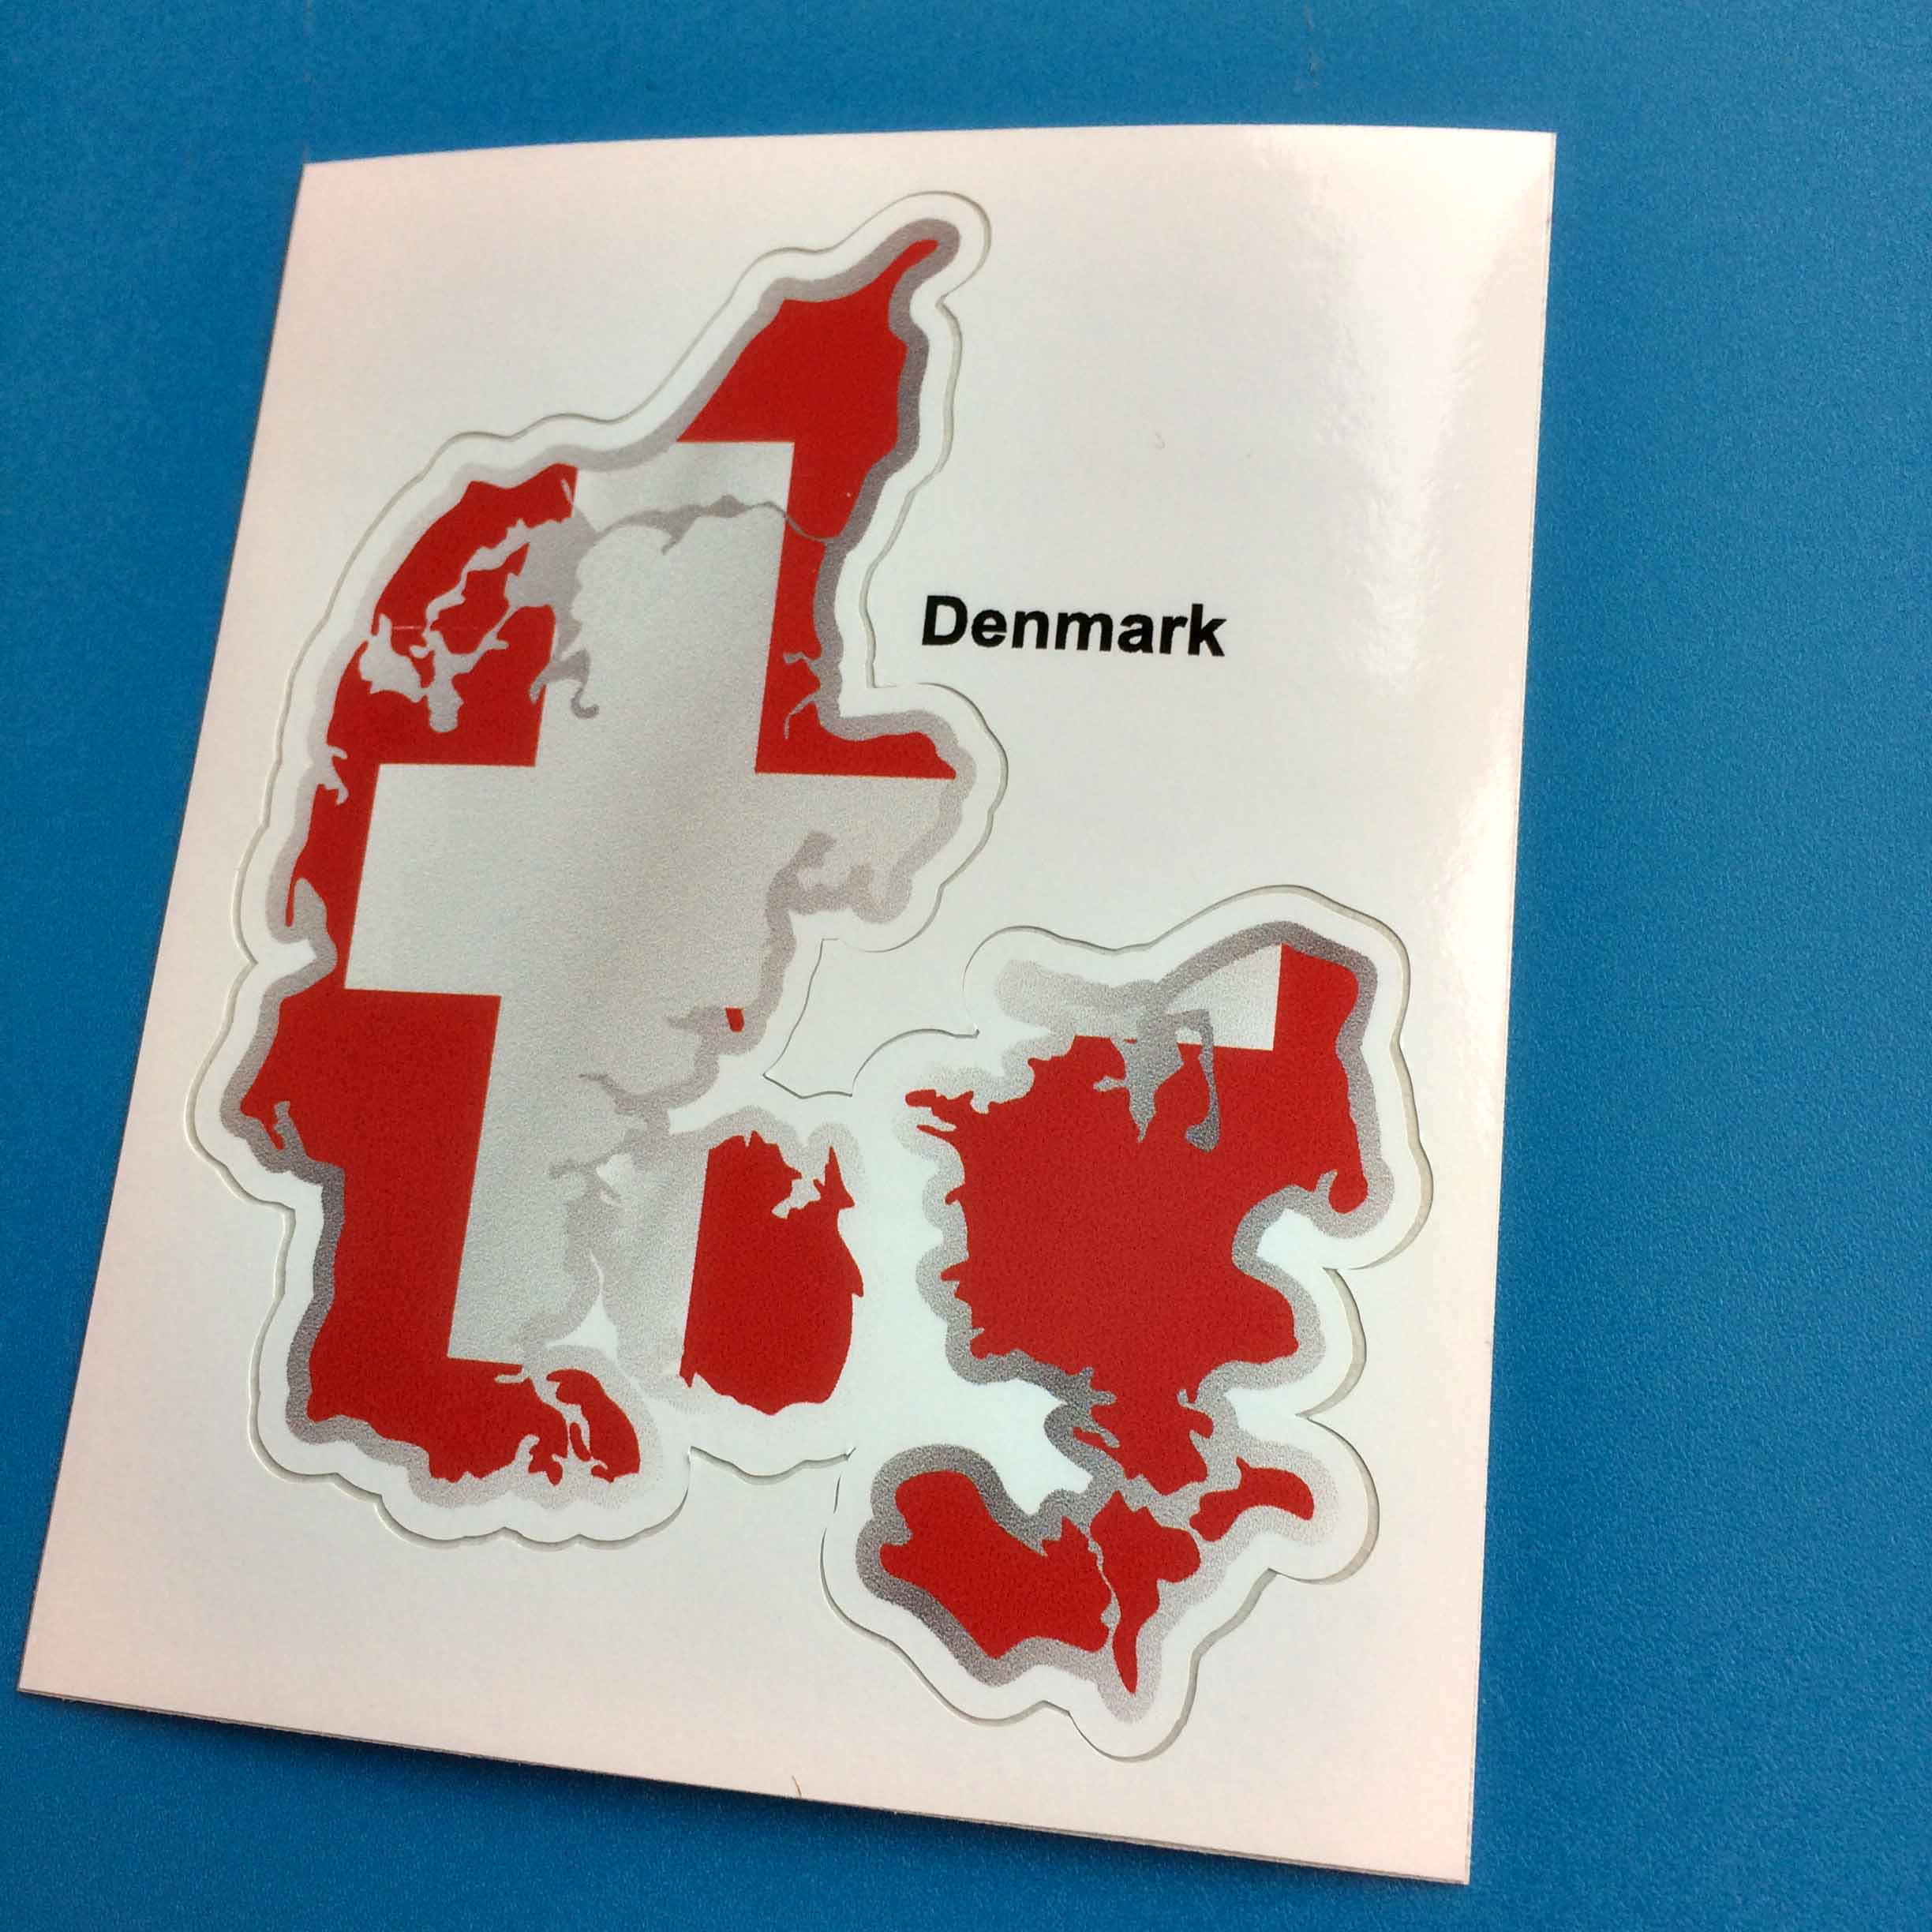 DENMARK FLAG AND MAP STICKER. A flag and map of Denmark. A white cross on a red background.